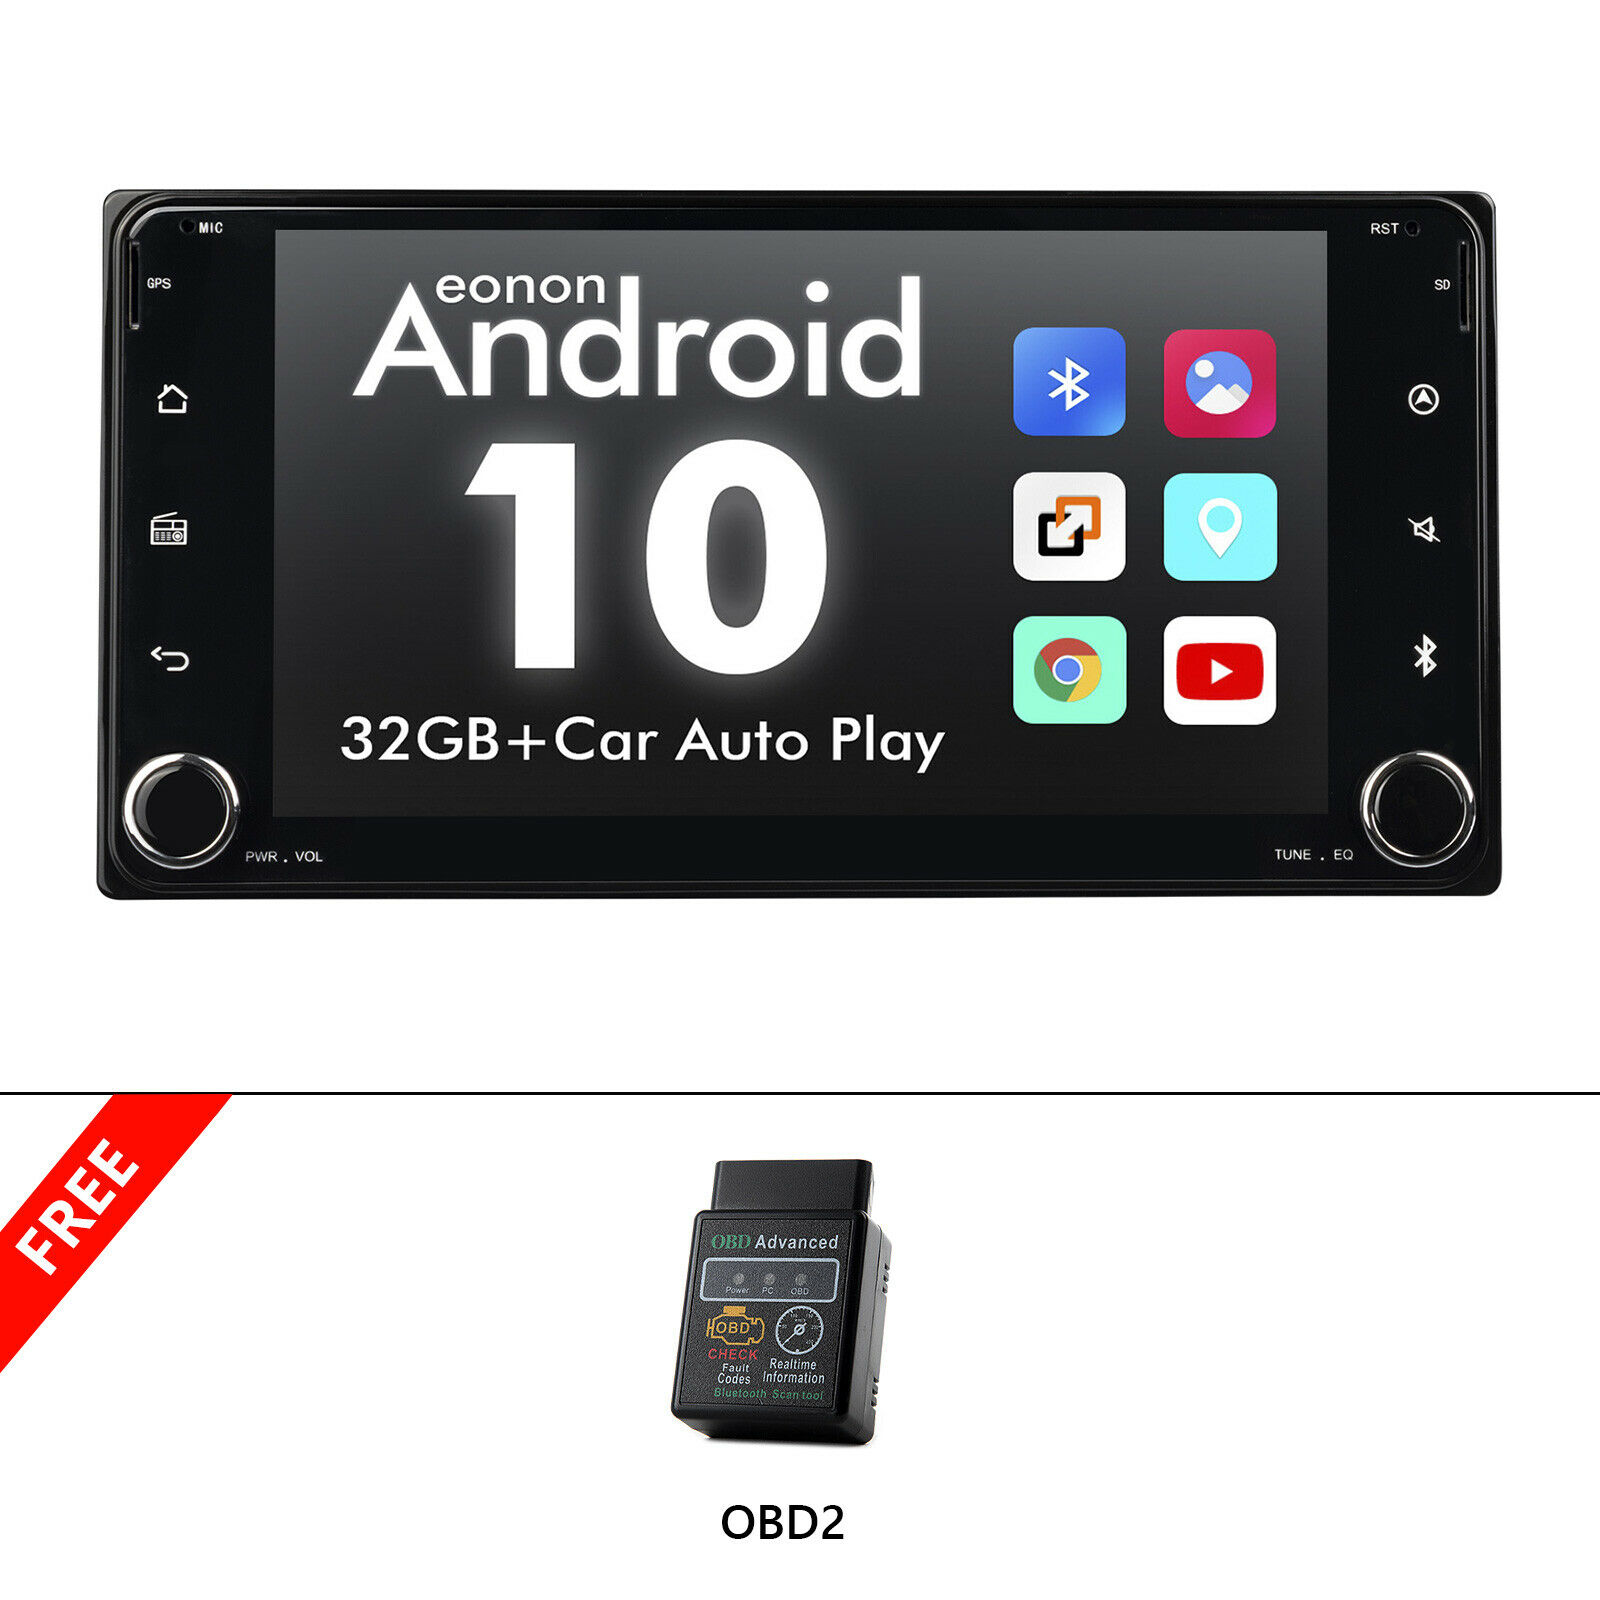 Obd+eonon Android 10 Gps Car Radio Android Auto Stereo Wifi Bluetooth For Toyota